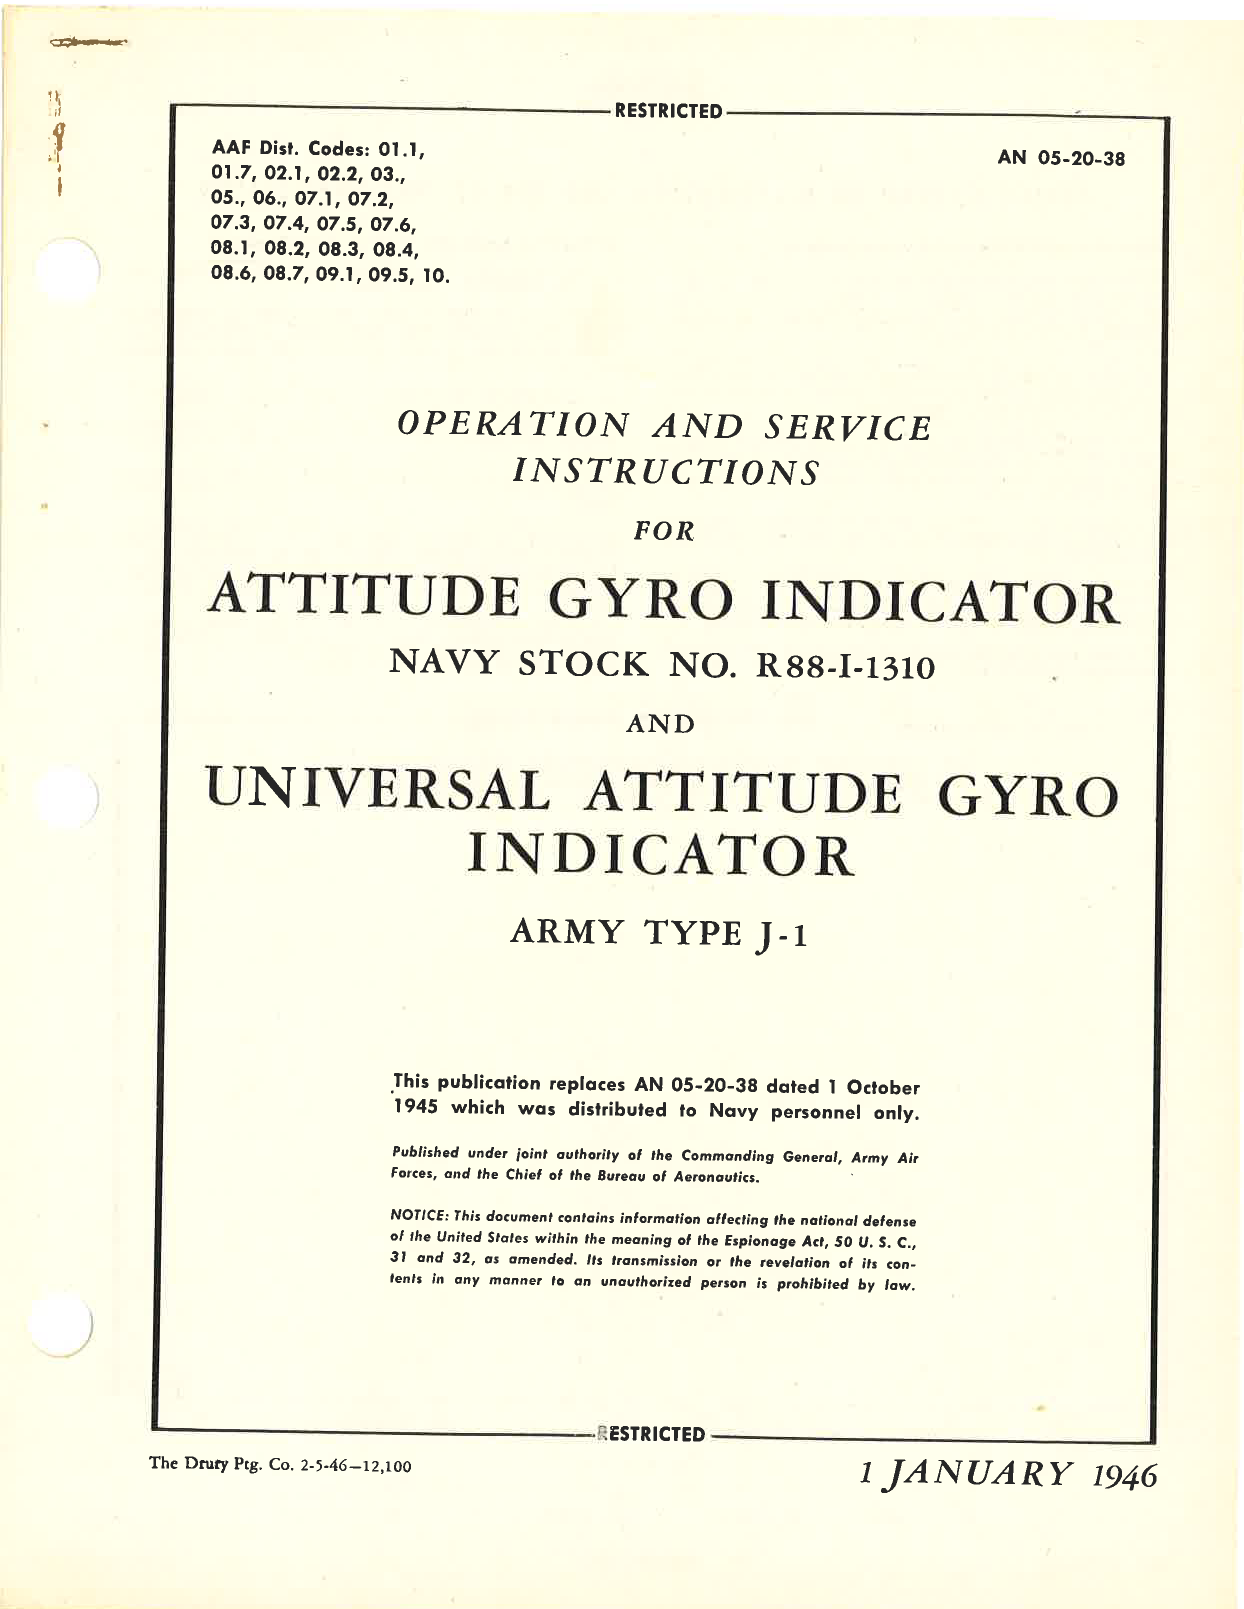 Sample page 1 from AirCorps Library document: Operation and Service Instructions for Attitude Gyro Indicator Navy R88-I-1310 and Universal Attitude Gyro Indicator Type J-1